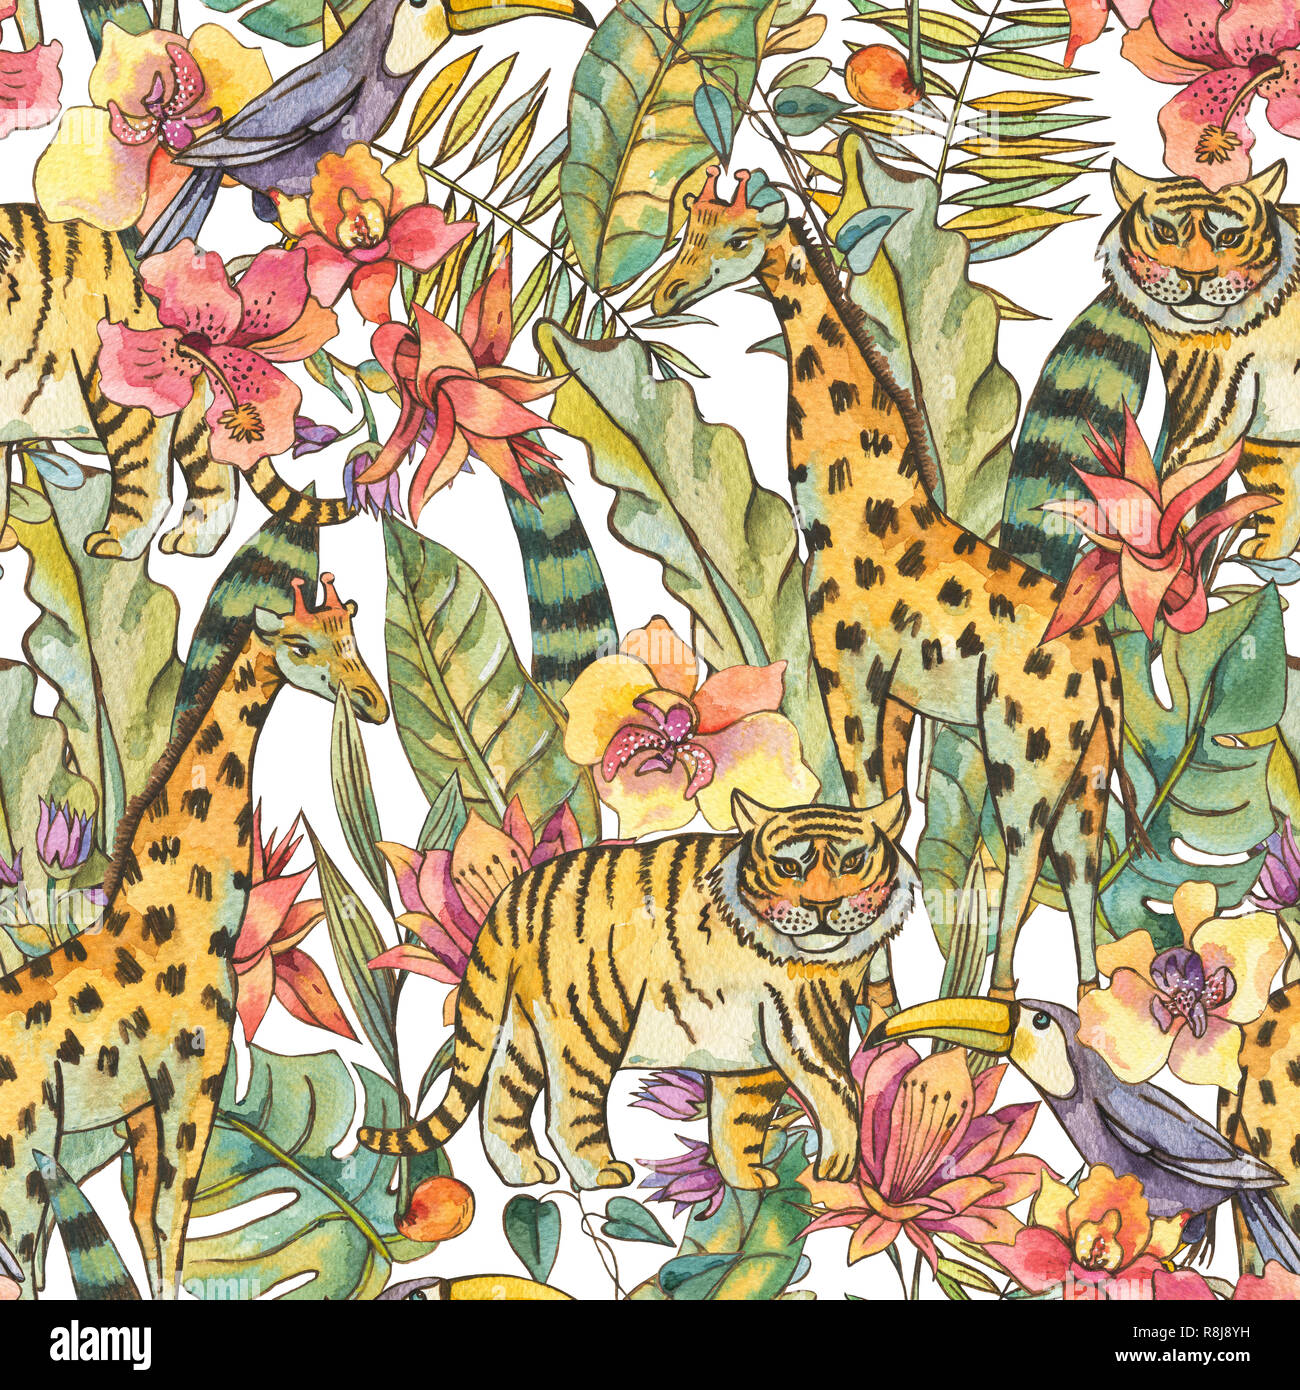 Watercolor jungle illustration, Natural Exotic Tropical Seamless Pattern with flowers of orchids, monstera, palm, liana, tiger, giraffe and toucan on  Stock Photo